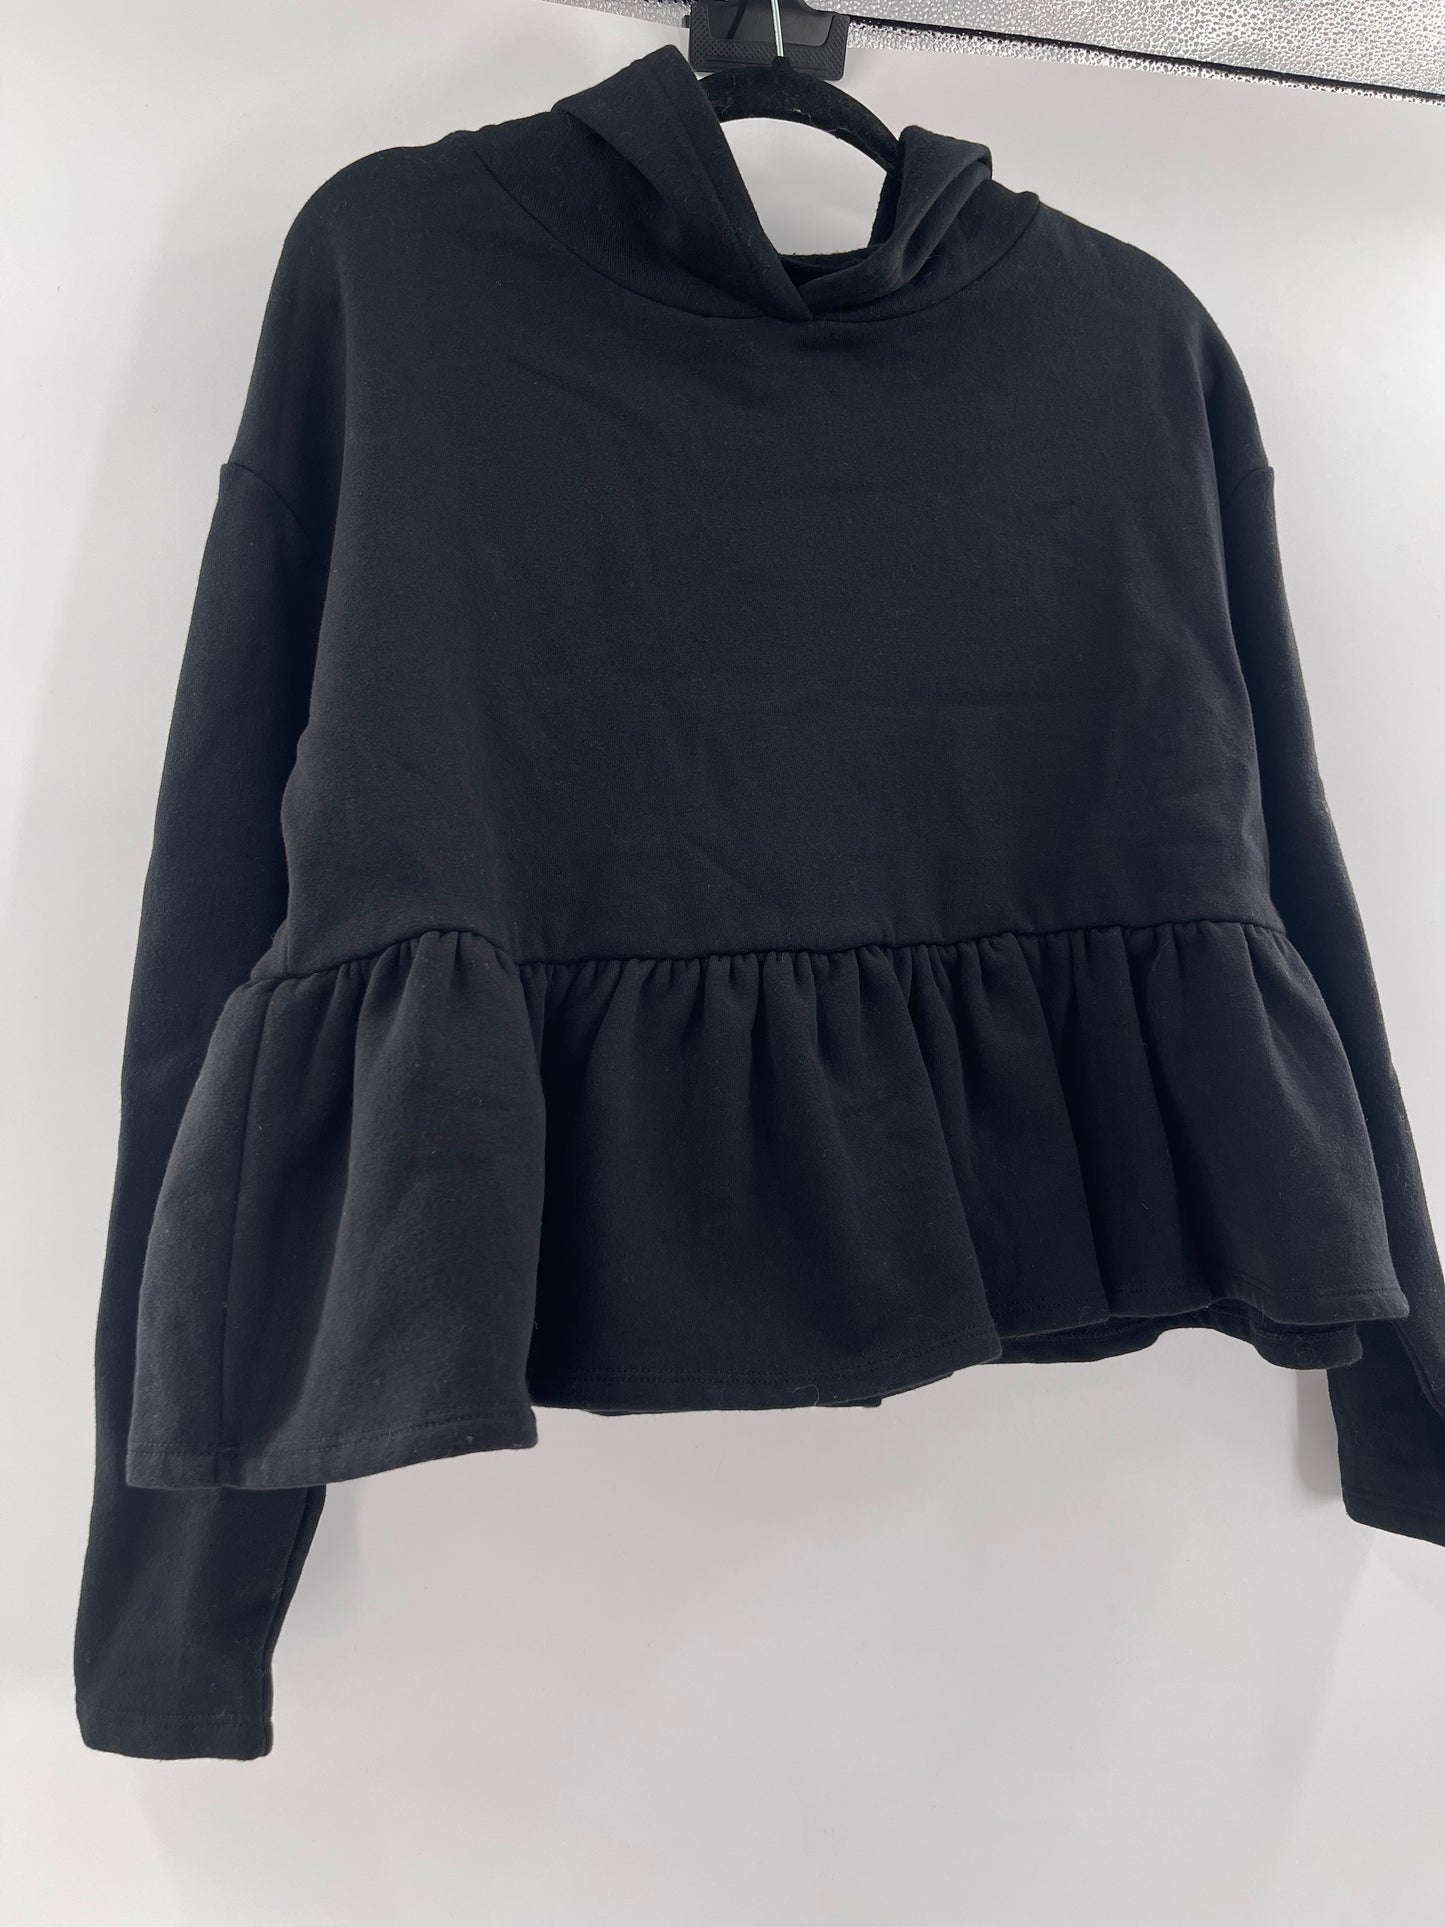 Urban Outfitters Cropped Black Hoodie (XS)